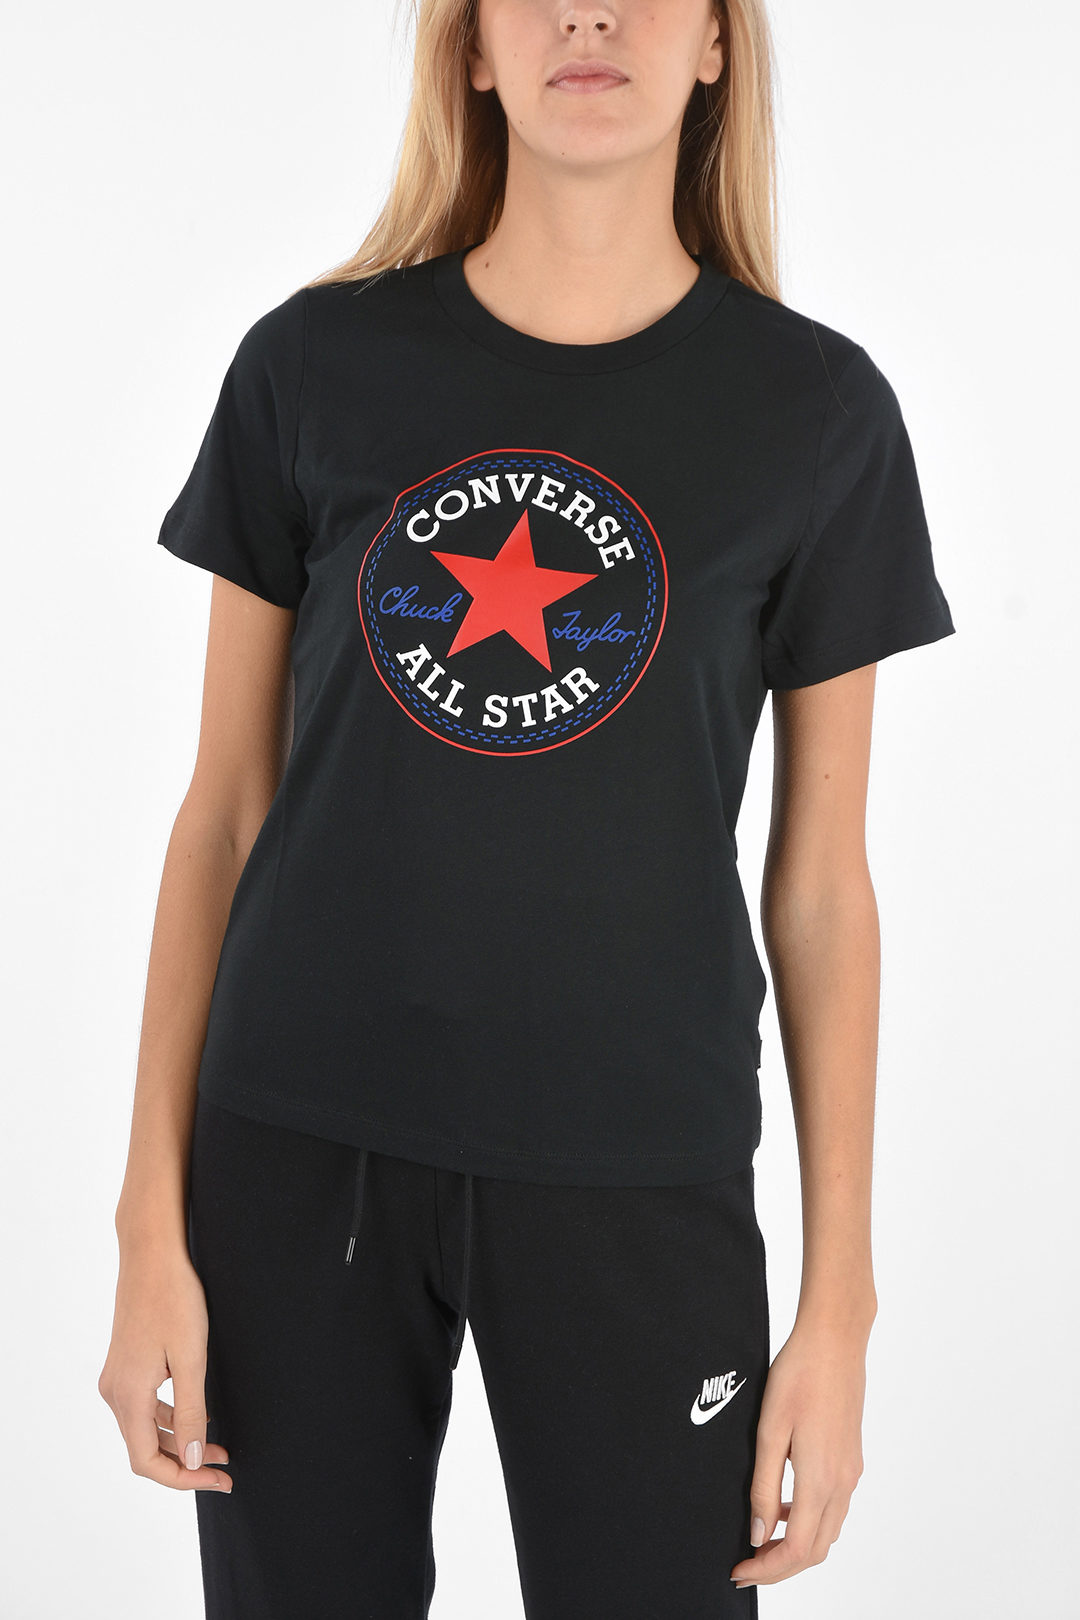 Converse ALL STAR Printed T-shirt Outlet women - Glamood